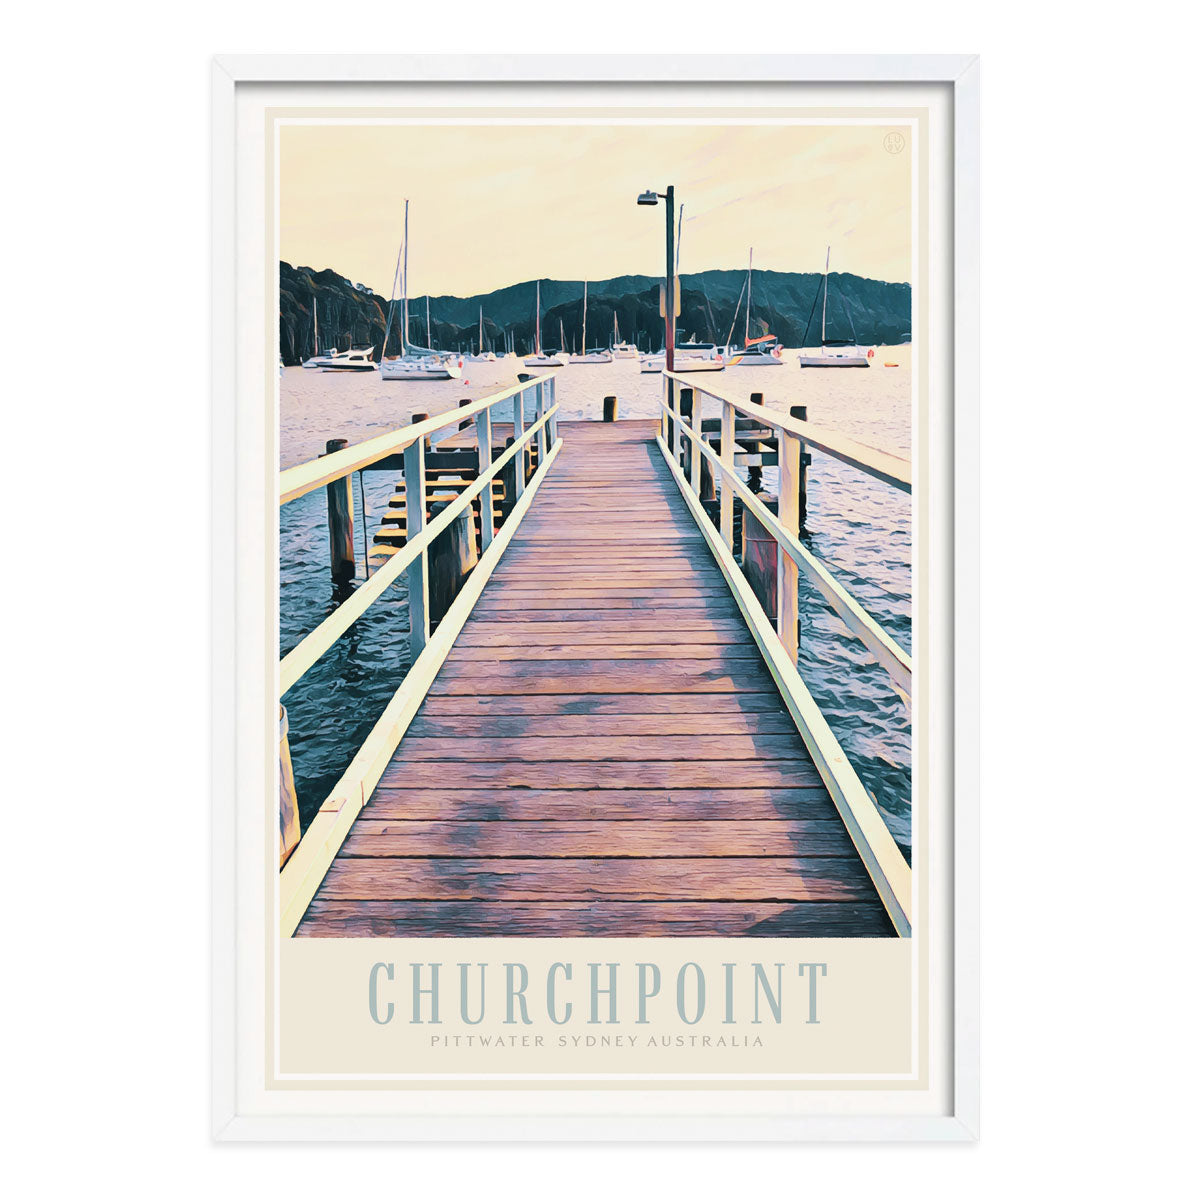 Churchpoint Sydney retro vintage travel poster print in white frame from Places We Luv